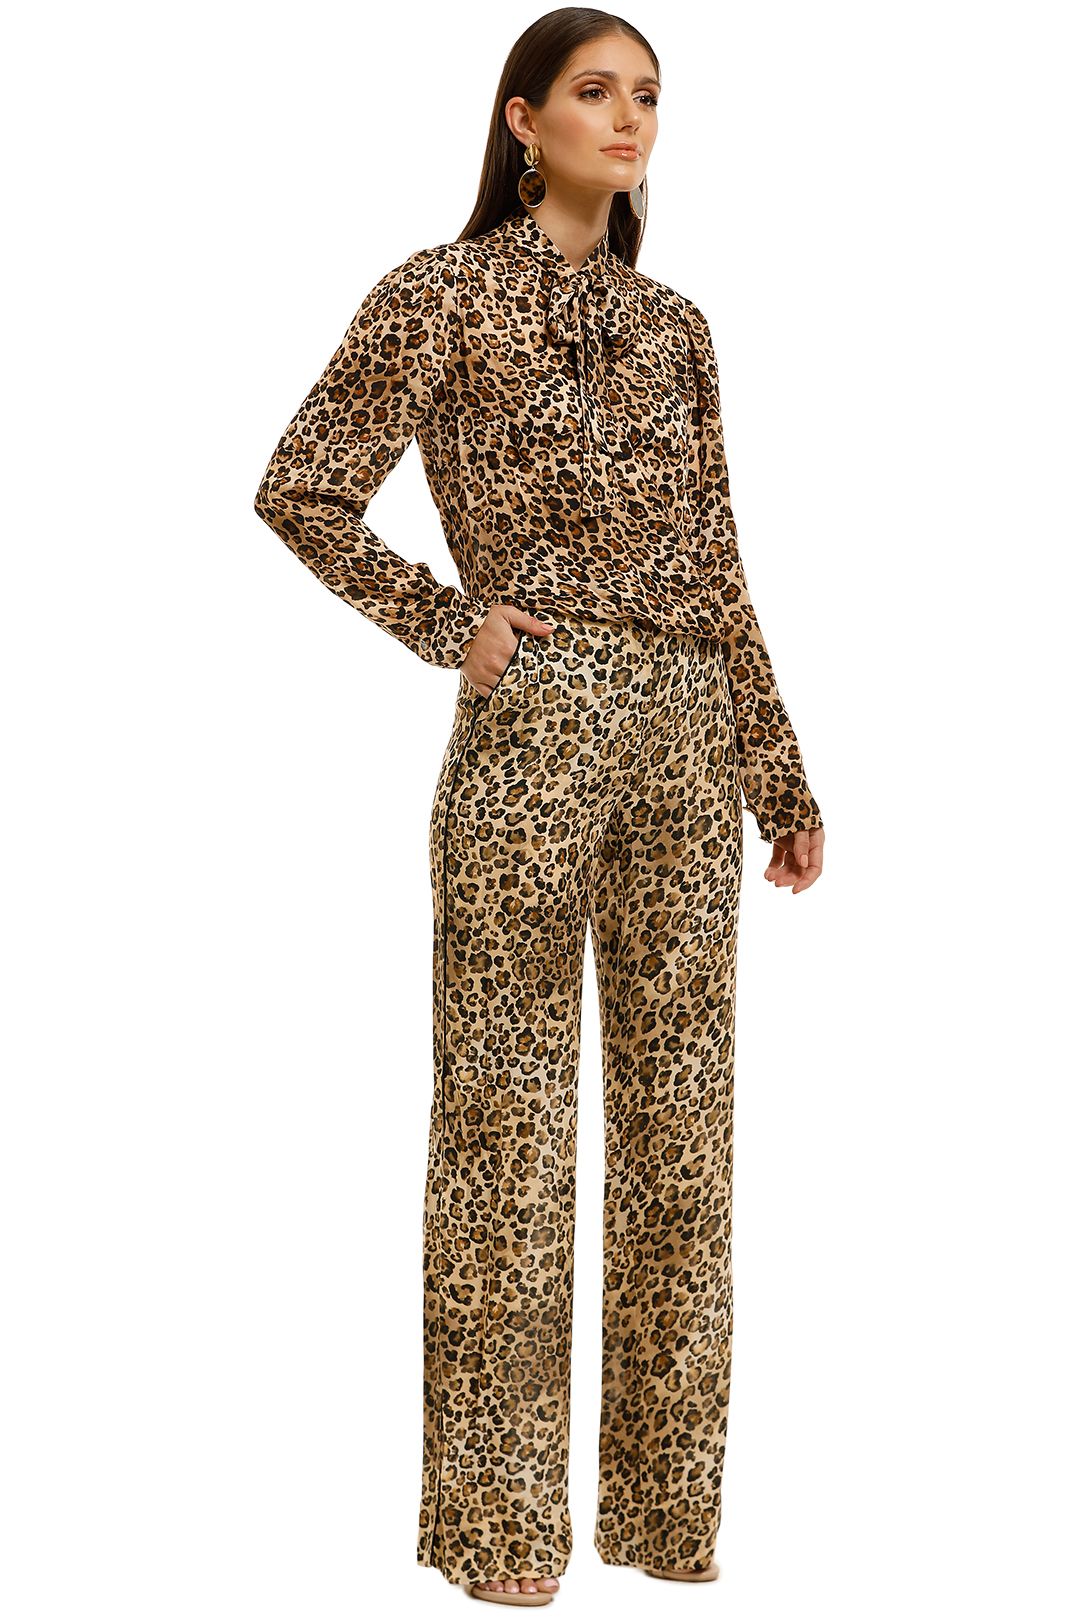 Tie Neck Top in Leopard by Nicholas for Hire | GlamCorner